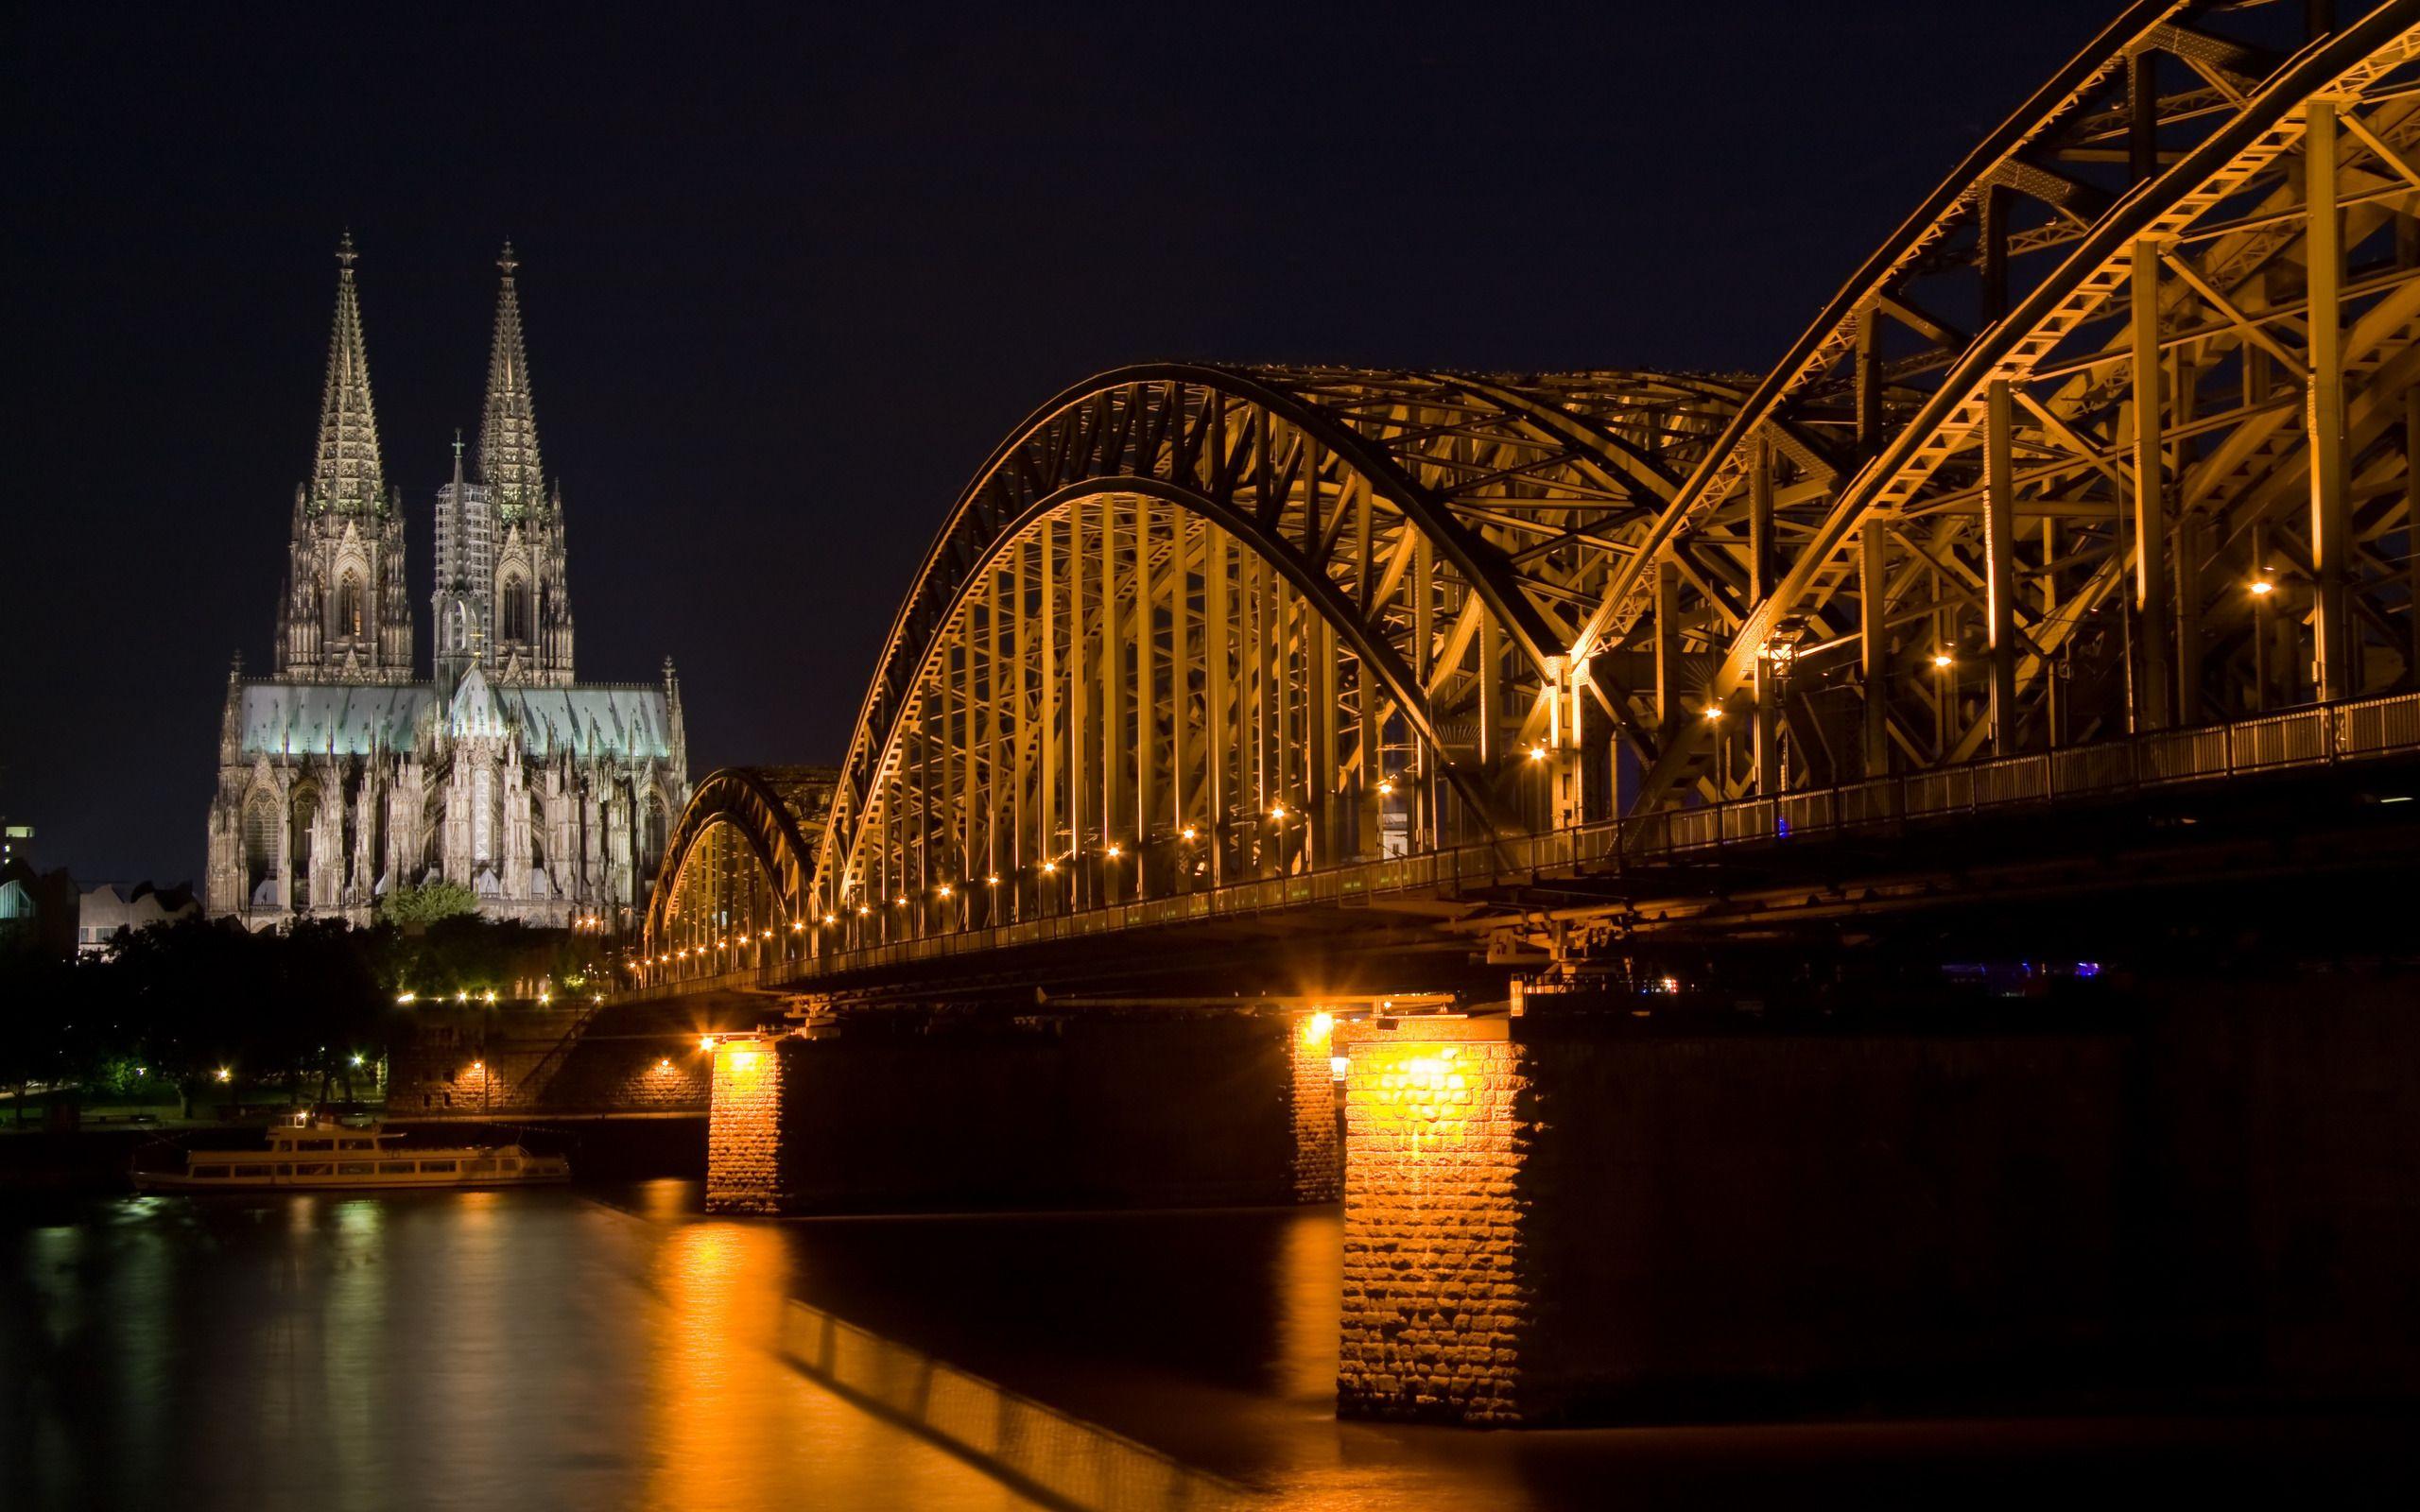 The Cologne cathedral wallpaper and image, picture